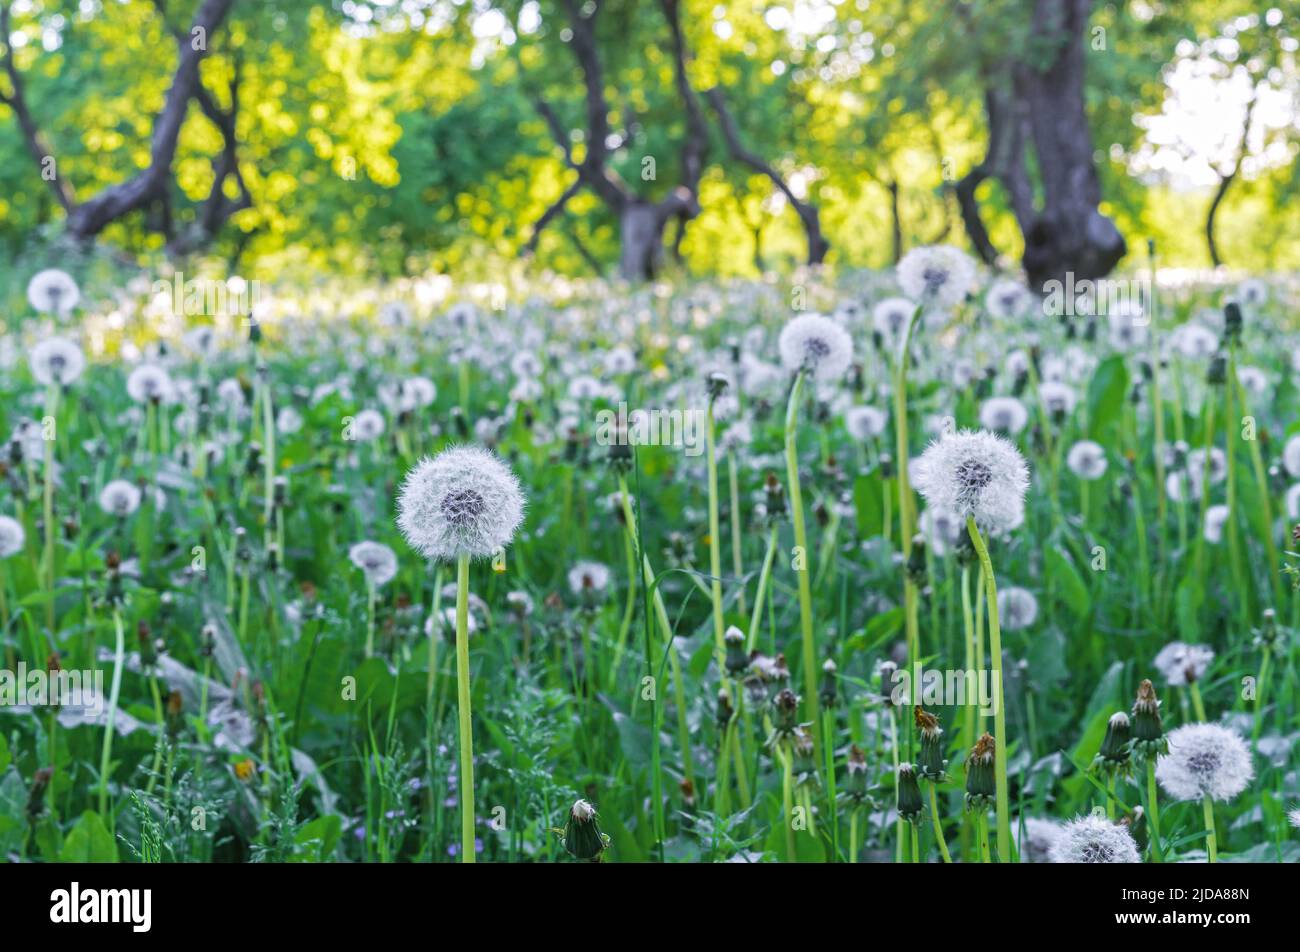 Glade with white and fluffy dandelions. Dandelion field. Stock Photo